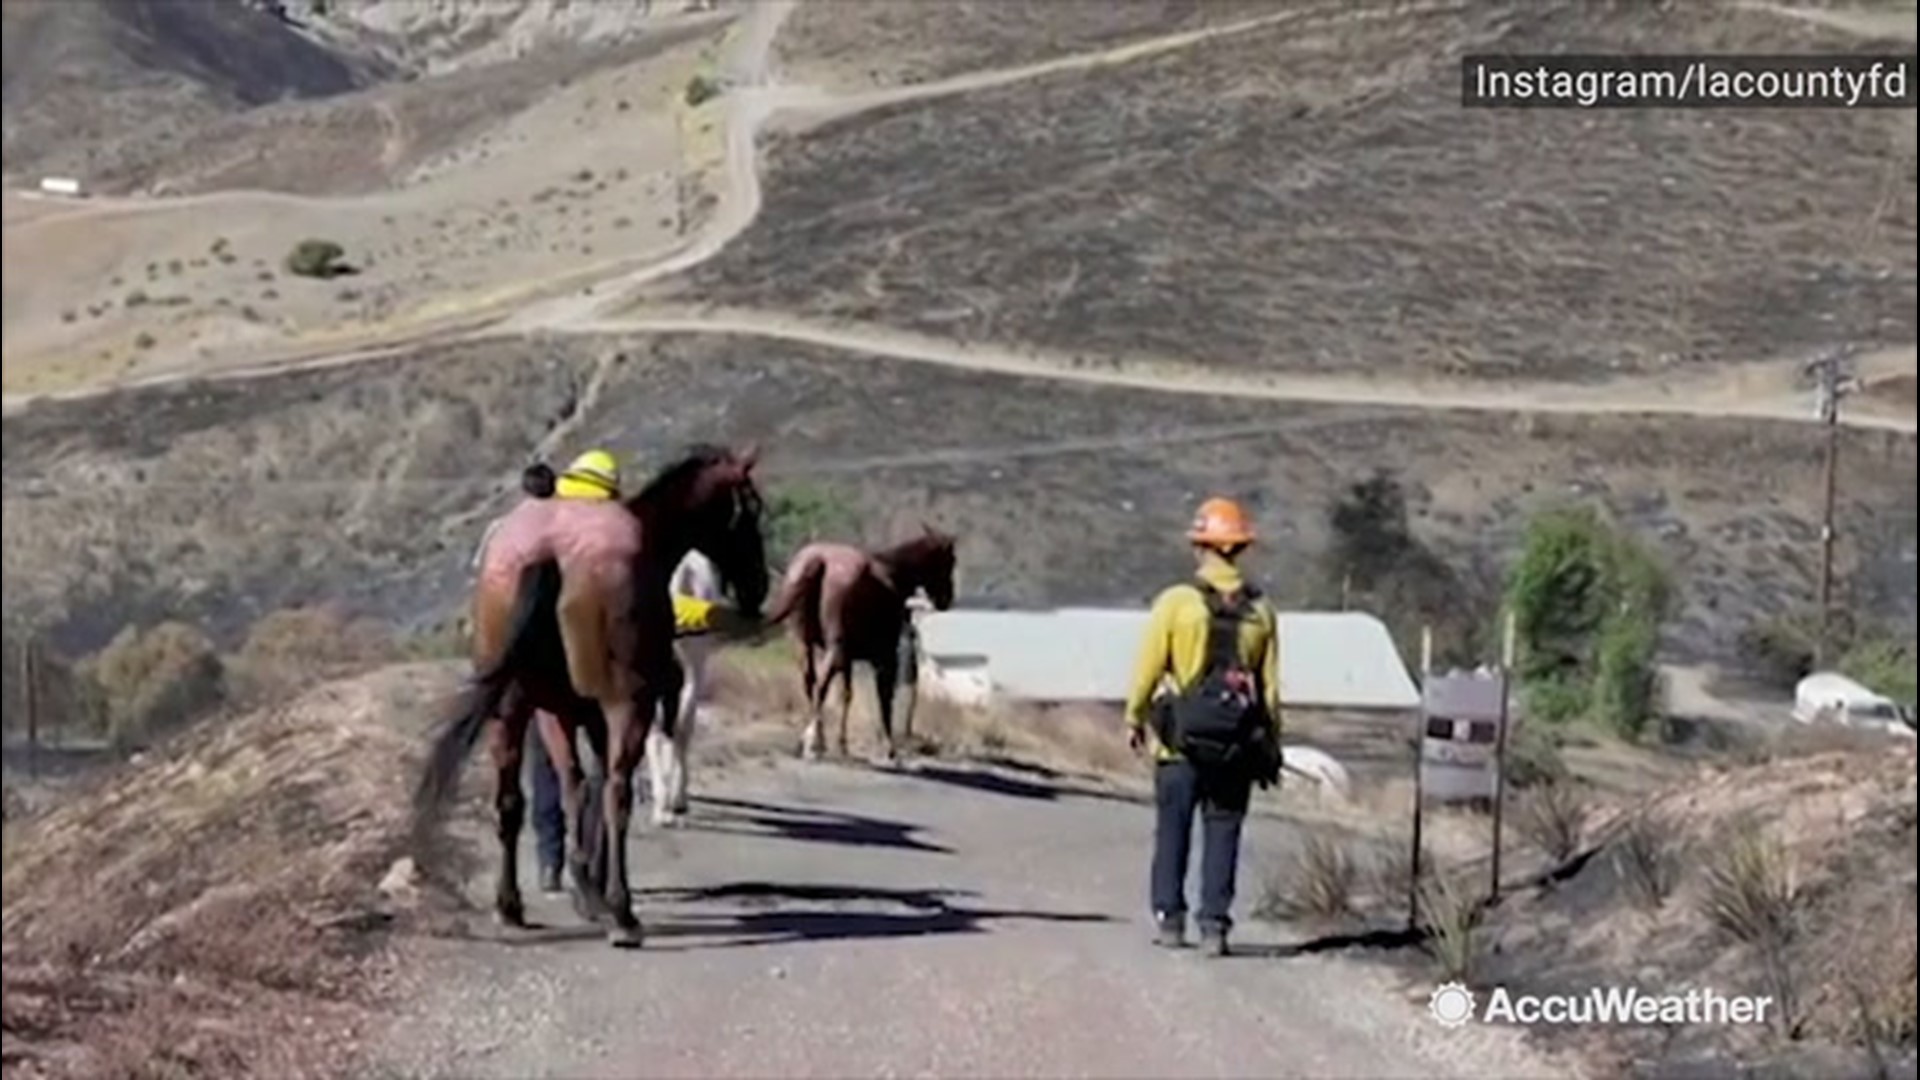 On Oct. 25, three horses were rescued from the evacuation area in Tick Canyon, California. The horses were reportedly without food and water for multiple days, but were saved from the fast moving Tick Fire and have been transported to the Castaic Animal Care Center for evaluation and treatment.